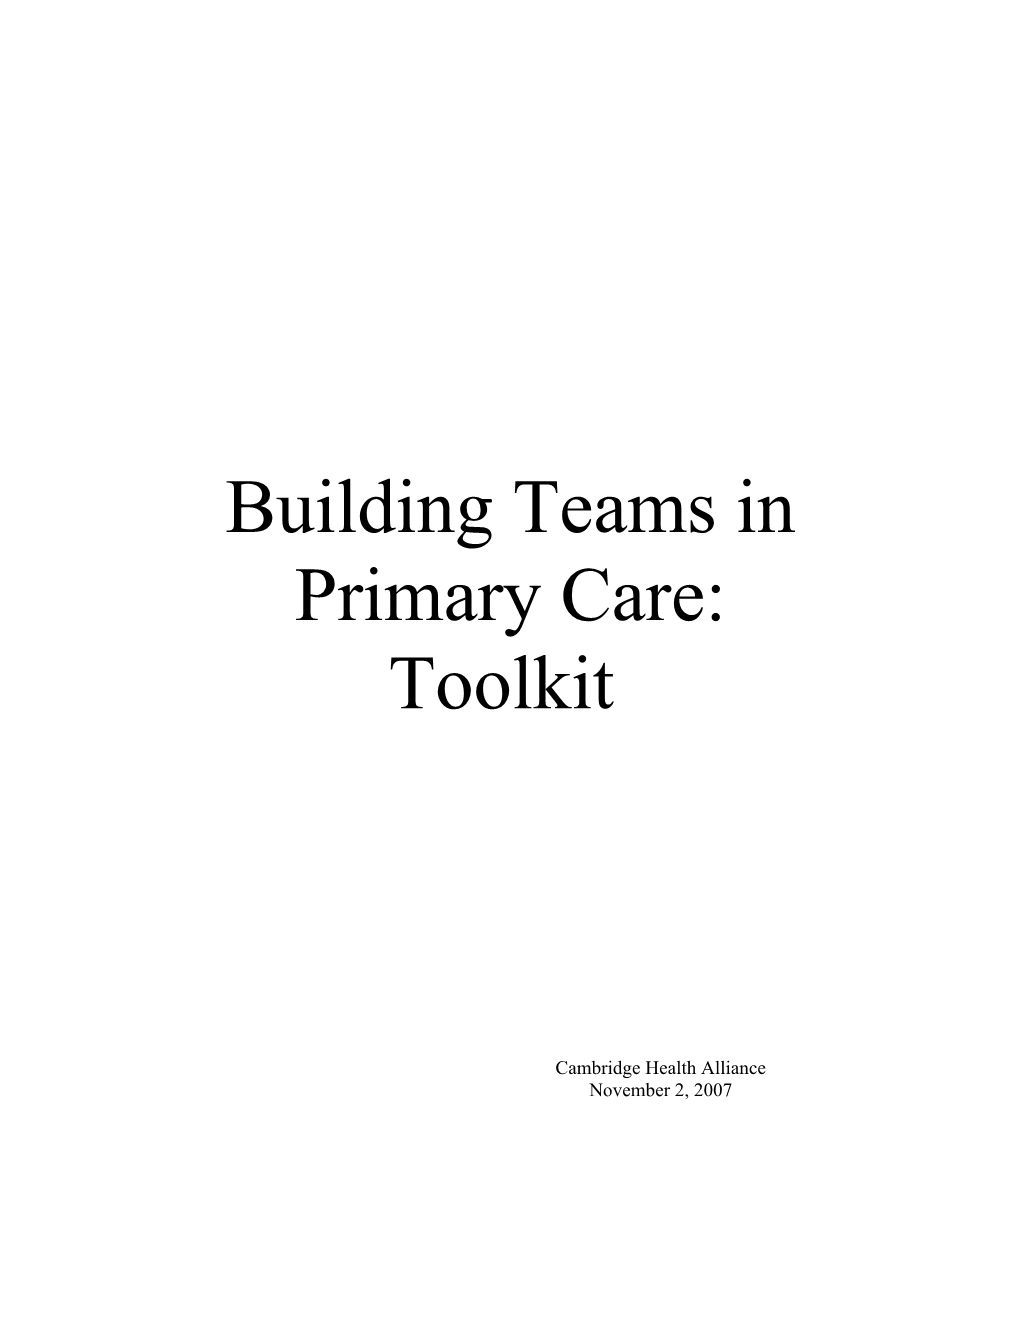 Building Teams in Primary Care: Toolkit